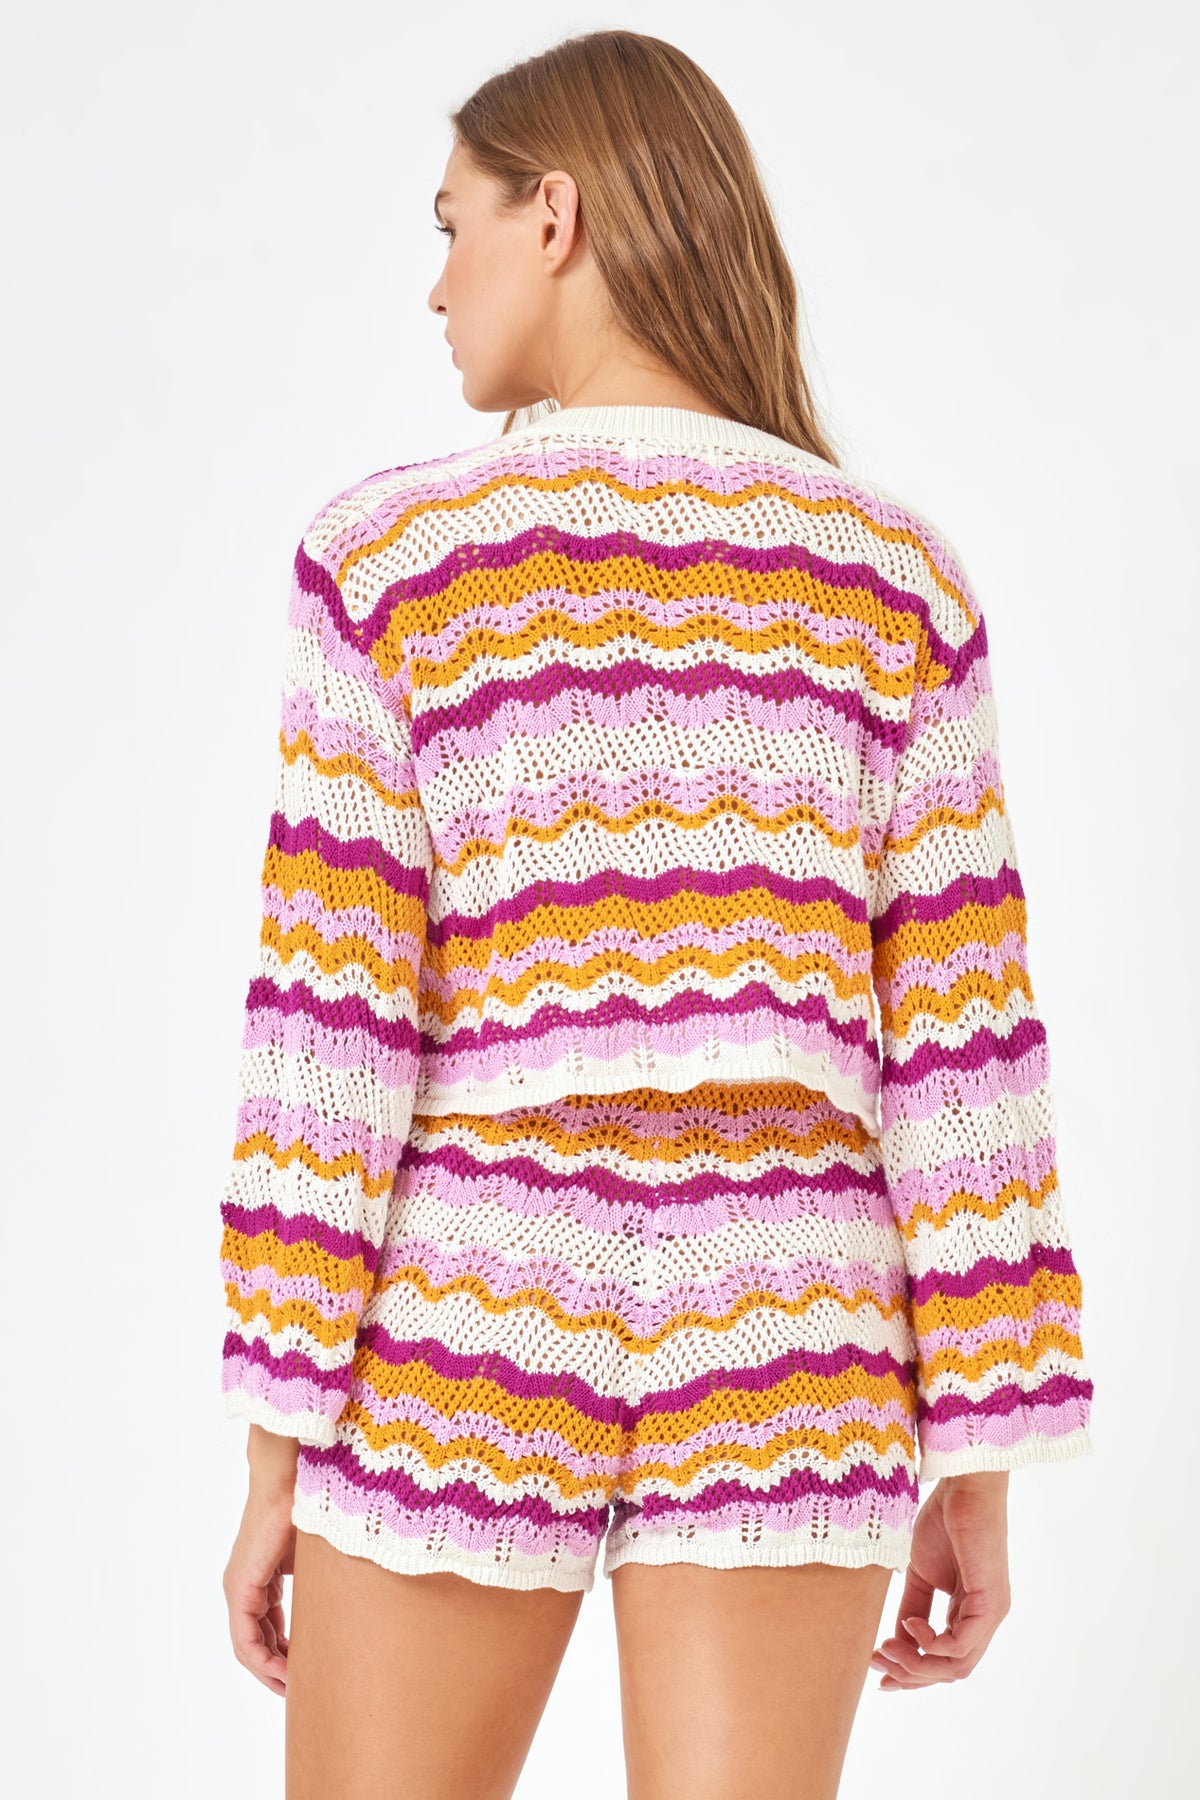 LSPACE x Revolve Sun Ray Sweater Summer Is Sweet | Model: Daria (size: S) | Hover